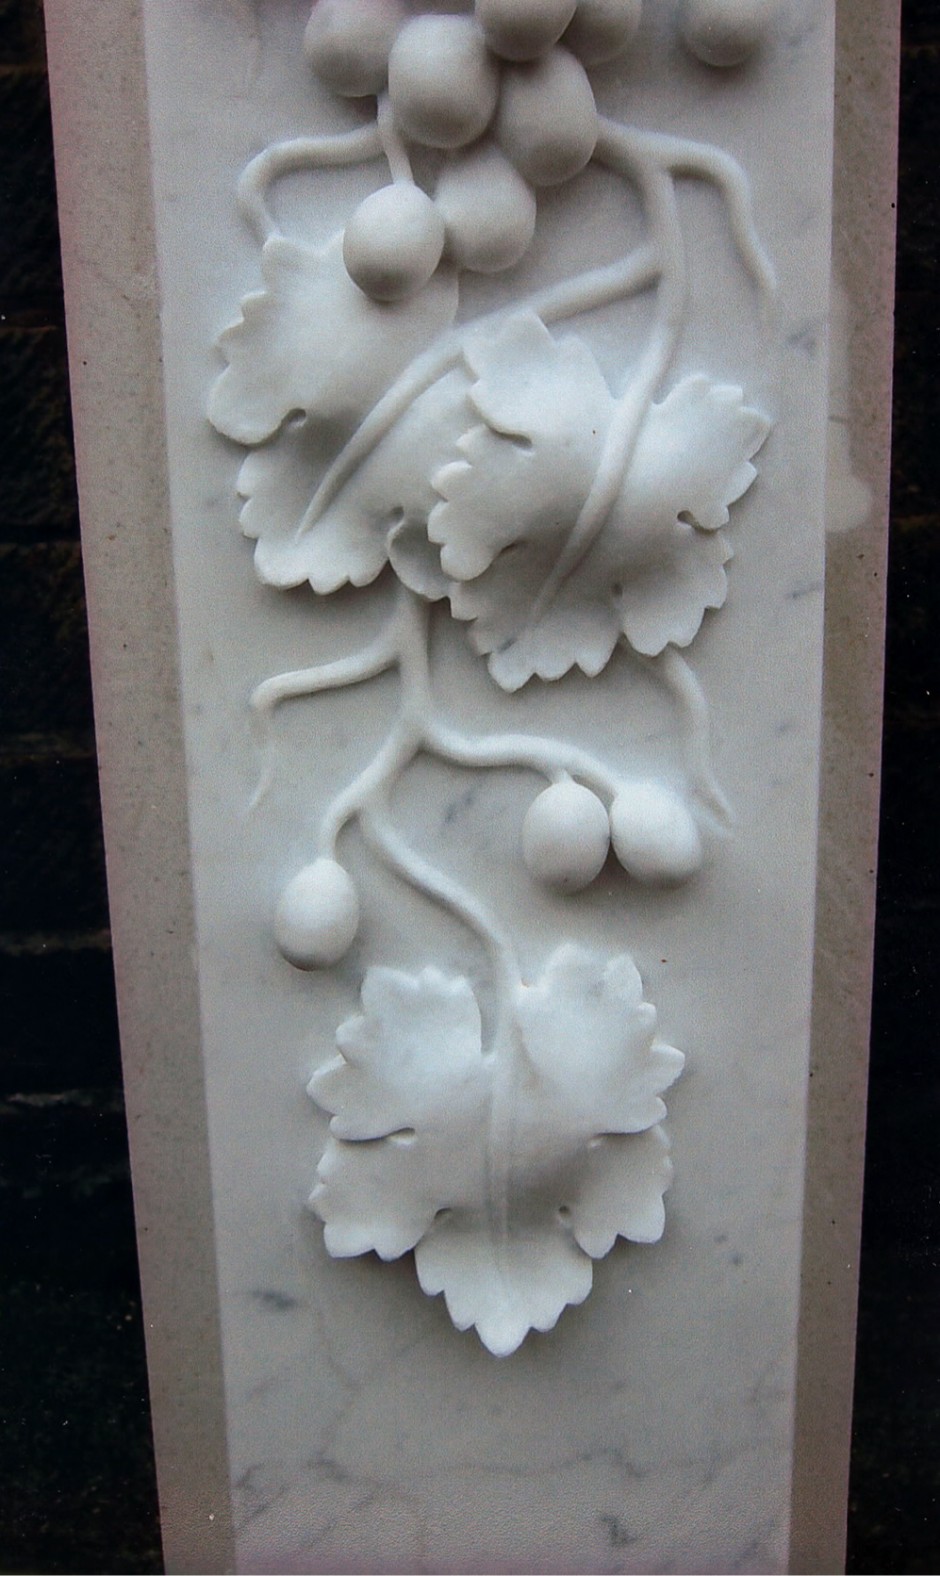 Grapes On The Vine With Vine Leaves Carved In Marble. - marble, grapes, vine, grape leaf, leaves